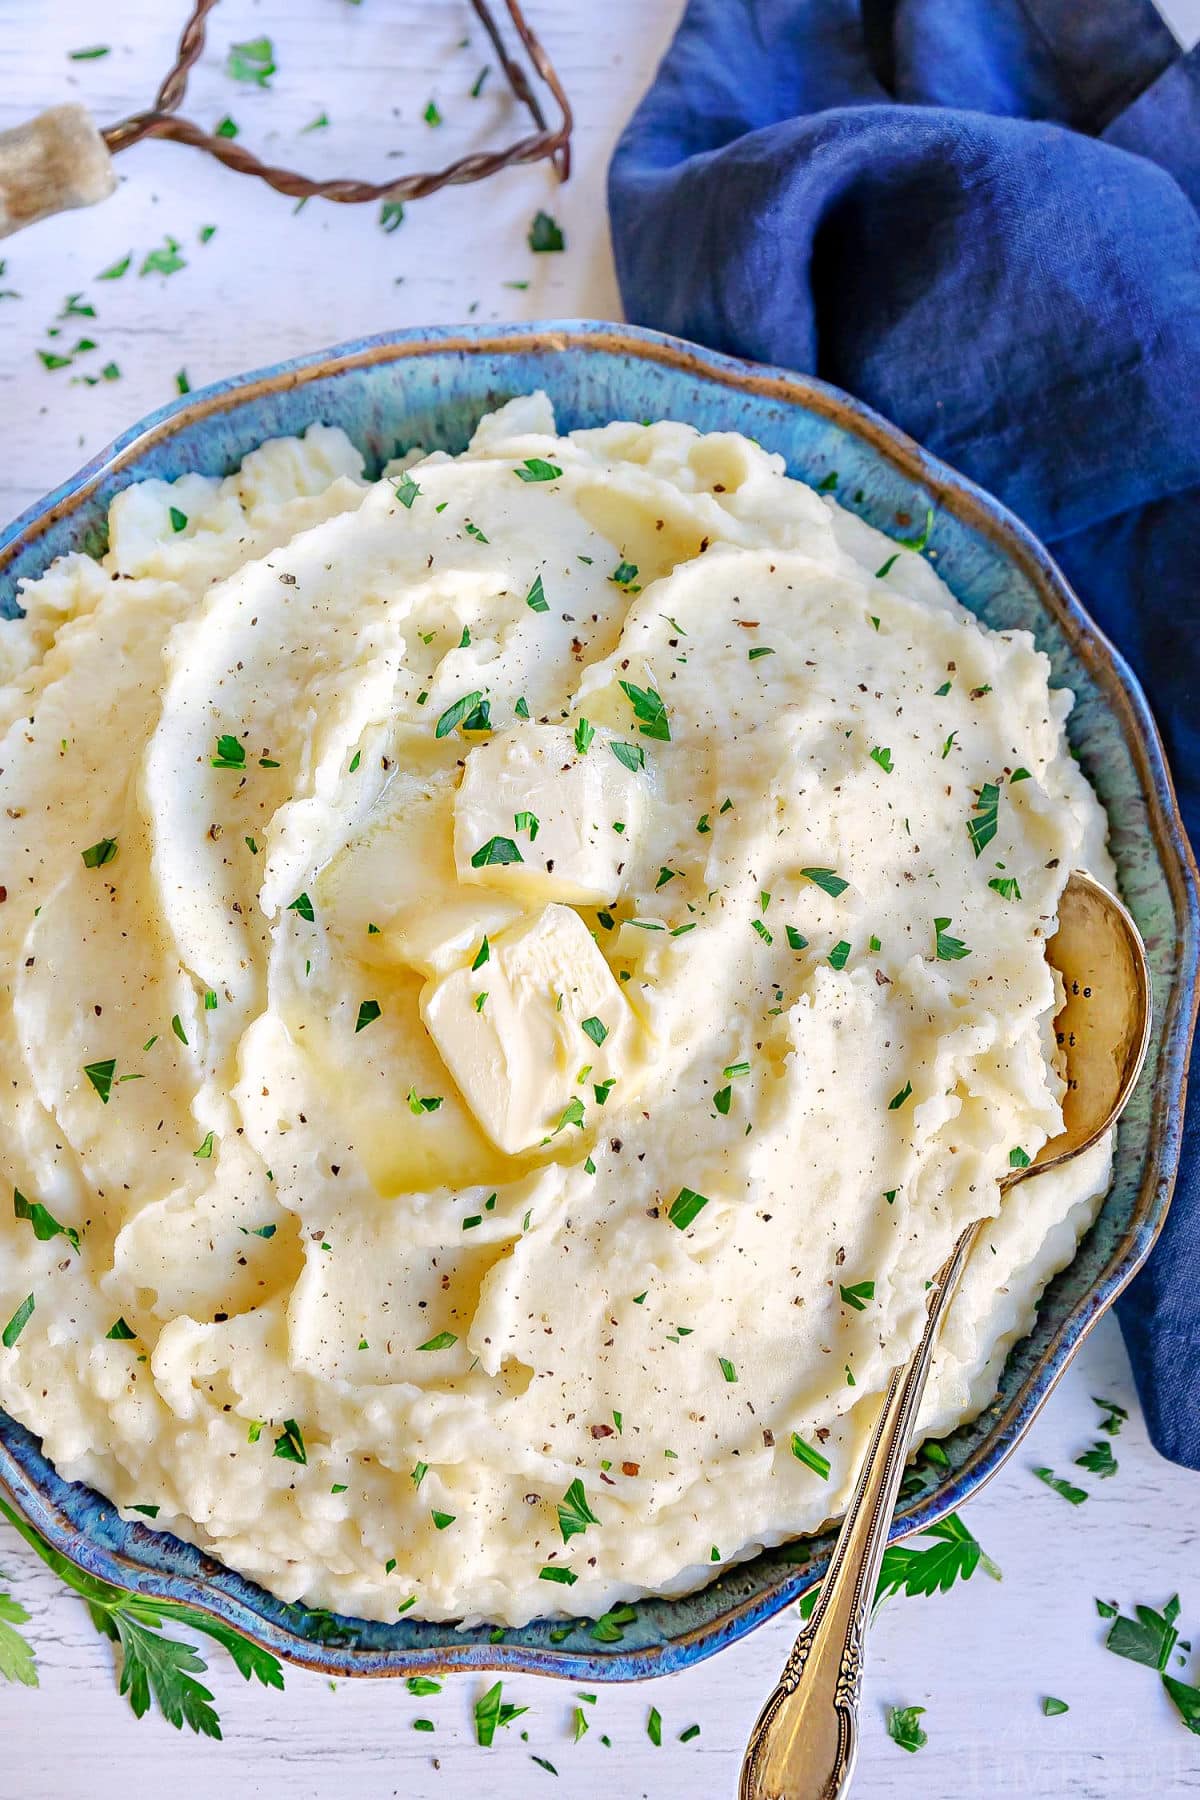 top down look at a blue and green bowl filled with fluffy mashed potatoes. slices of butter, pepper and chopped parsley garnish the mashed potatoes.